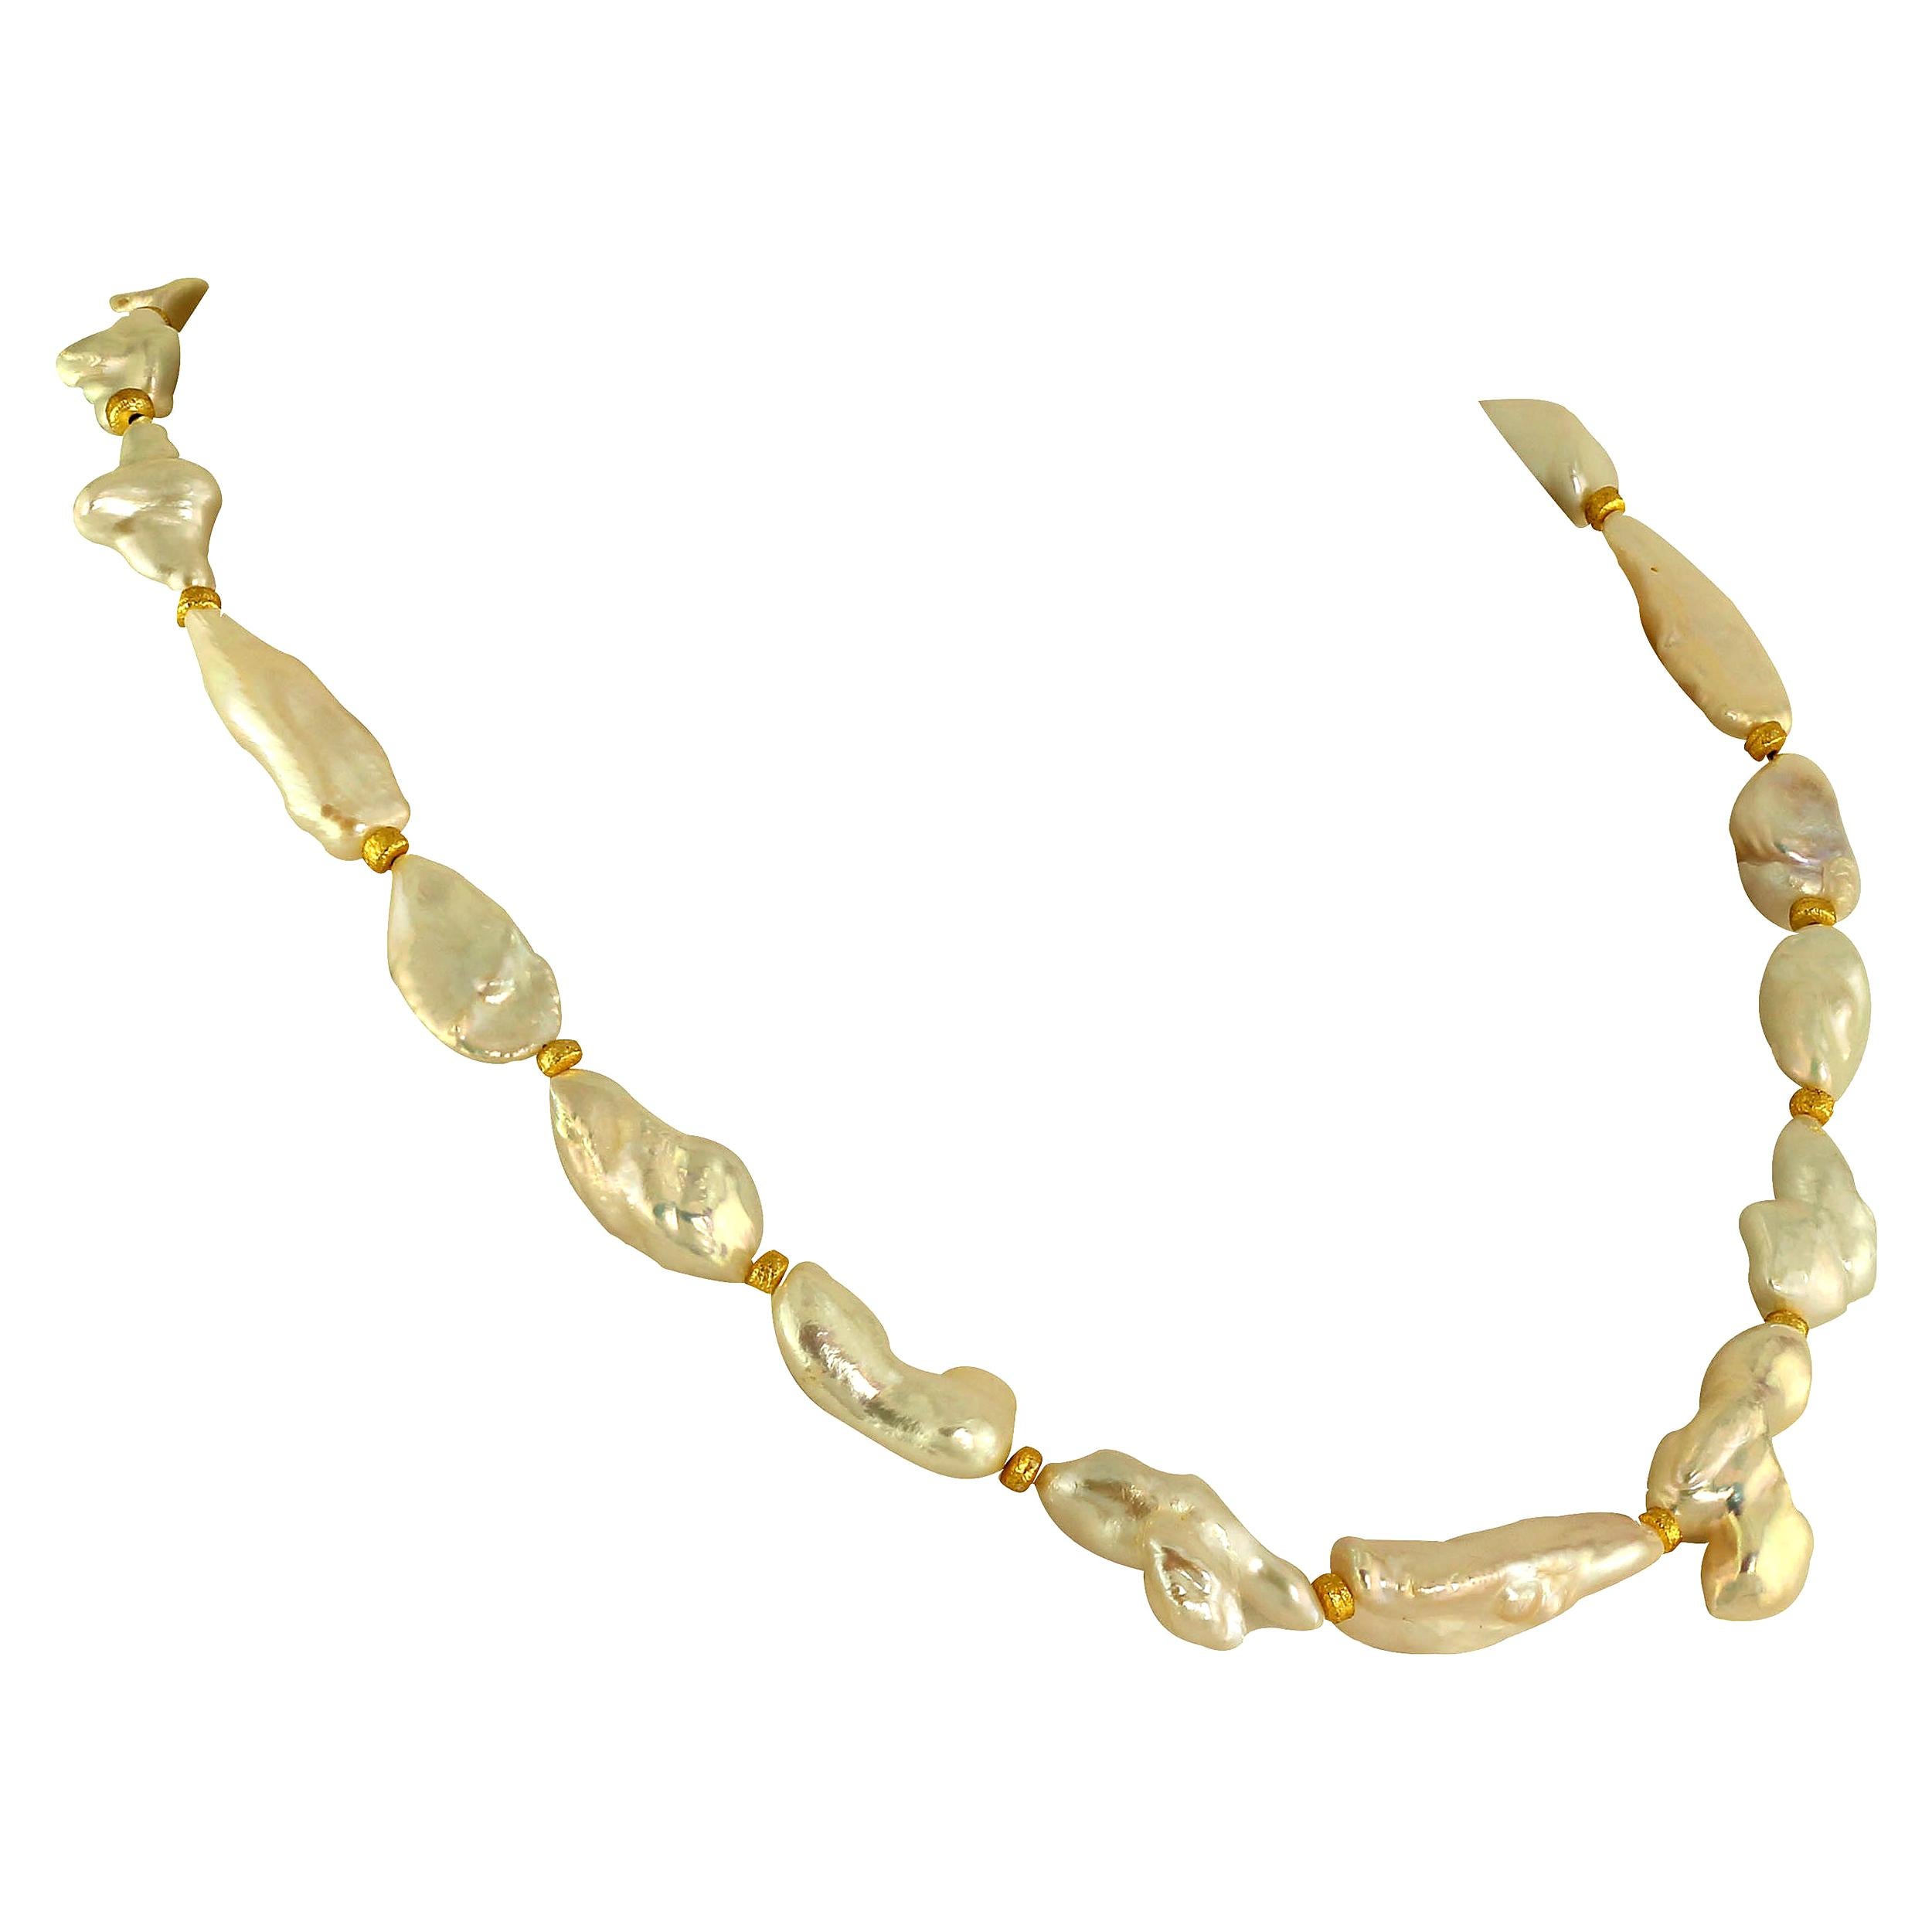 
No grit no Pearl
One of a kind, 20 inch, Freshwater white Pearl necklace with gold (22K plate over copper) rondelle accents. These unusual Pearls range in length from 30 to 15 MM and each is a unique shape. For the person who loves Pearls,